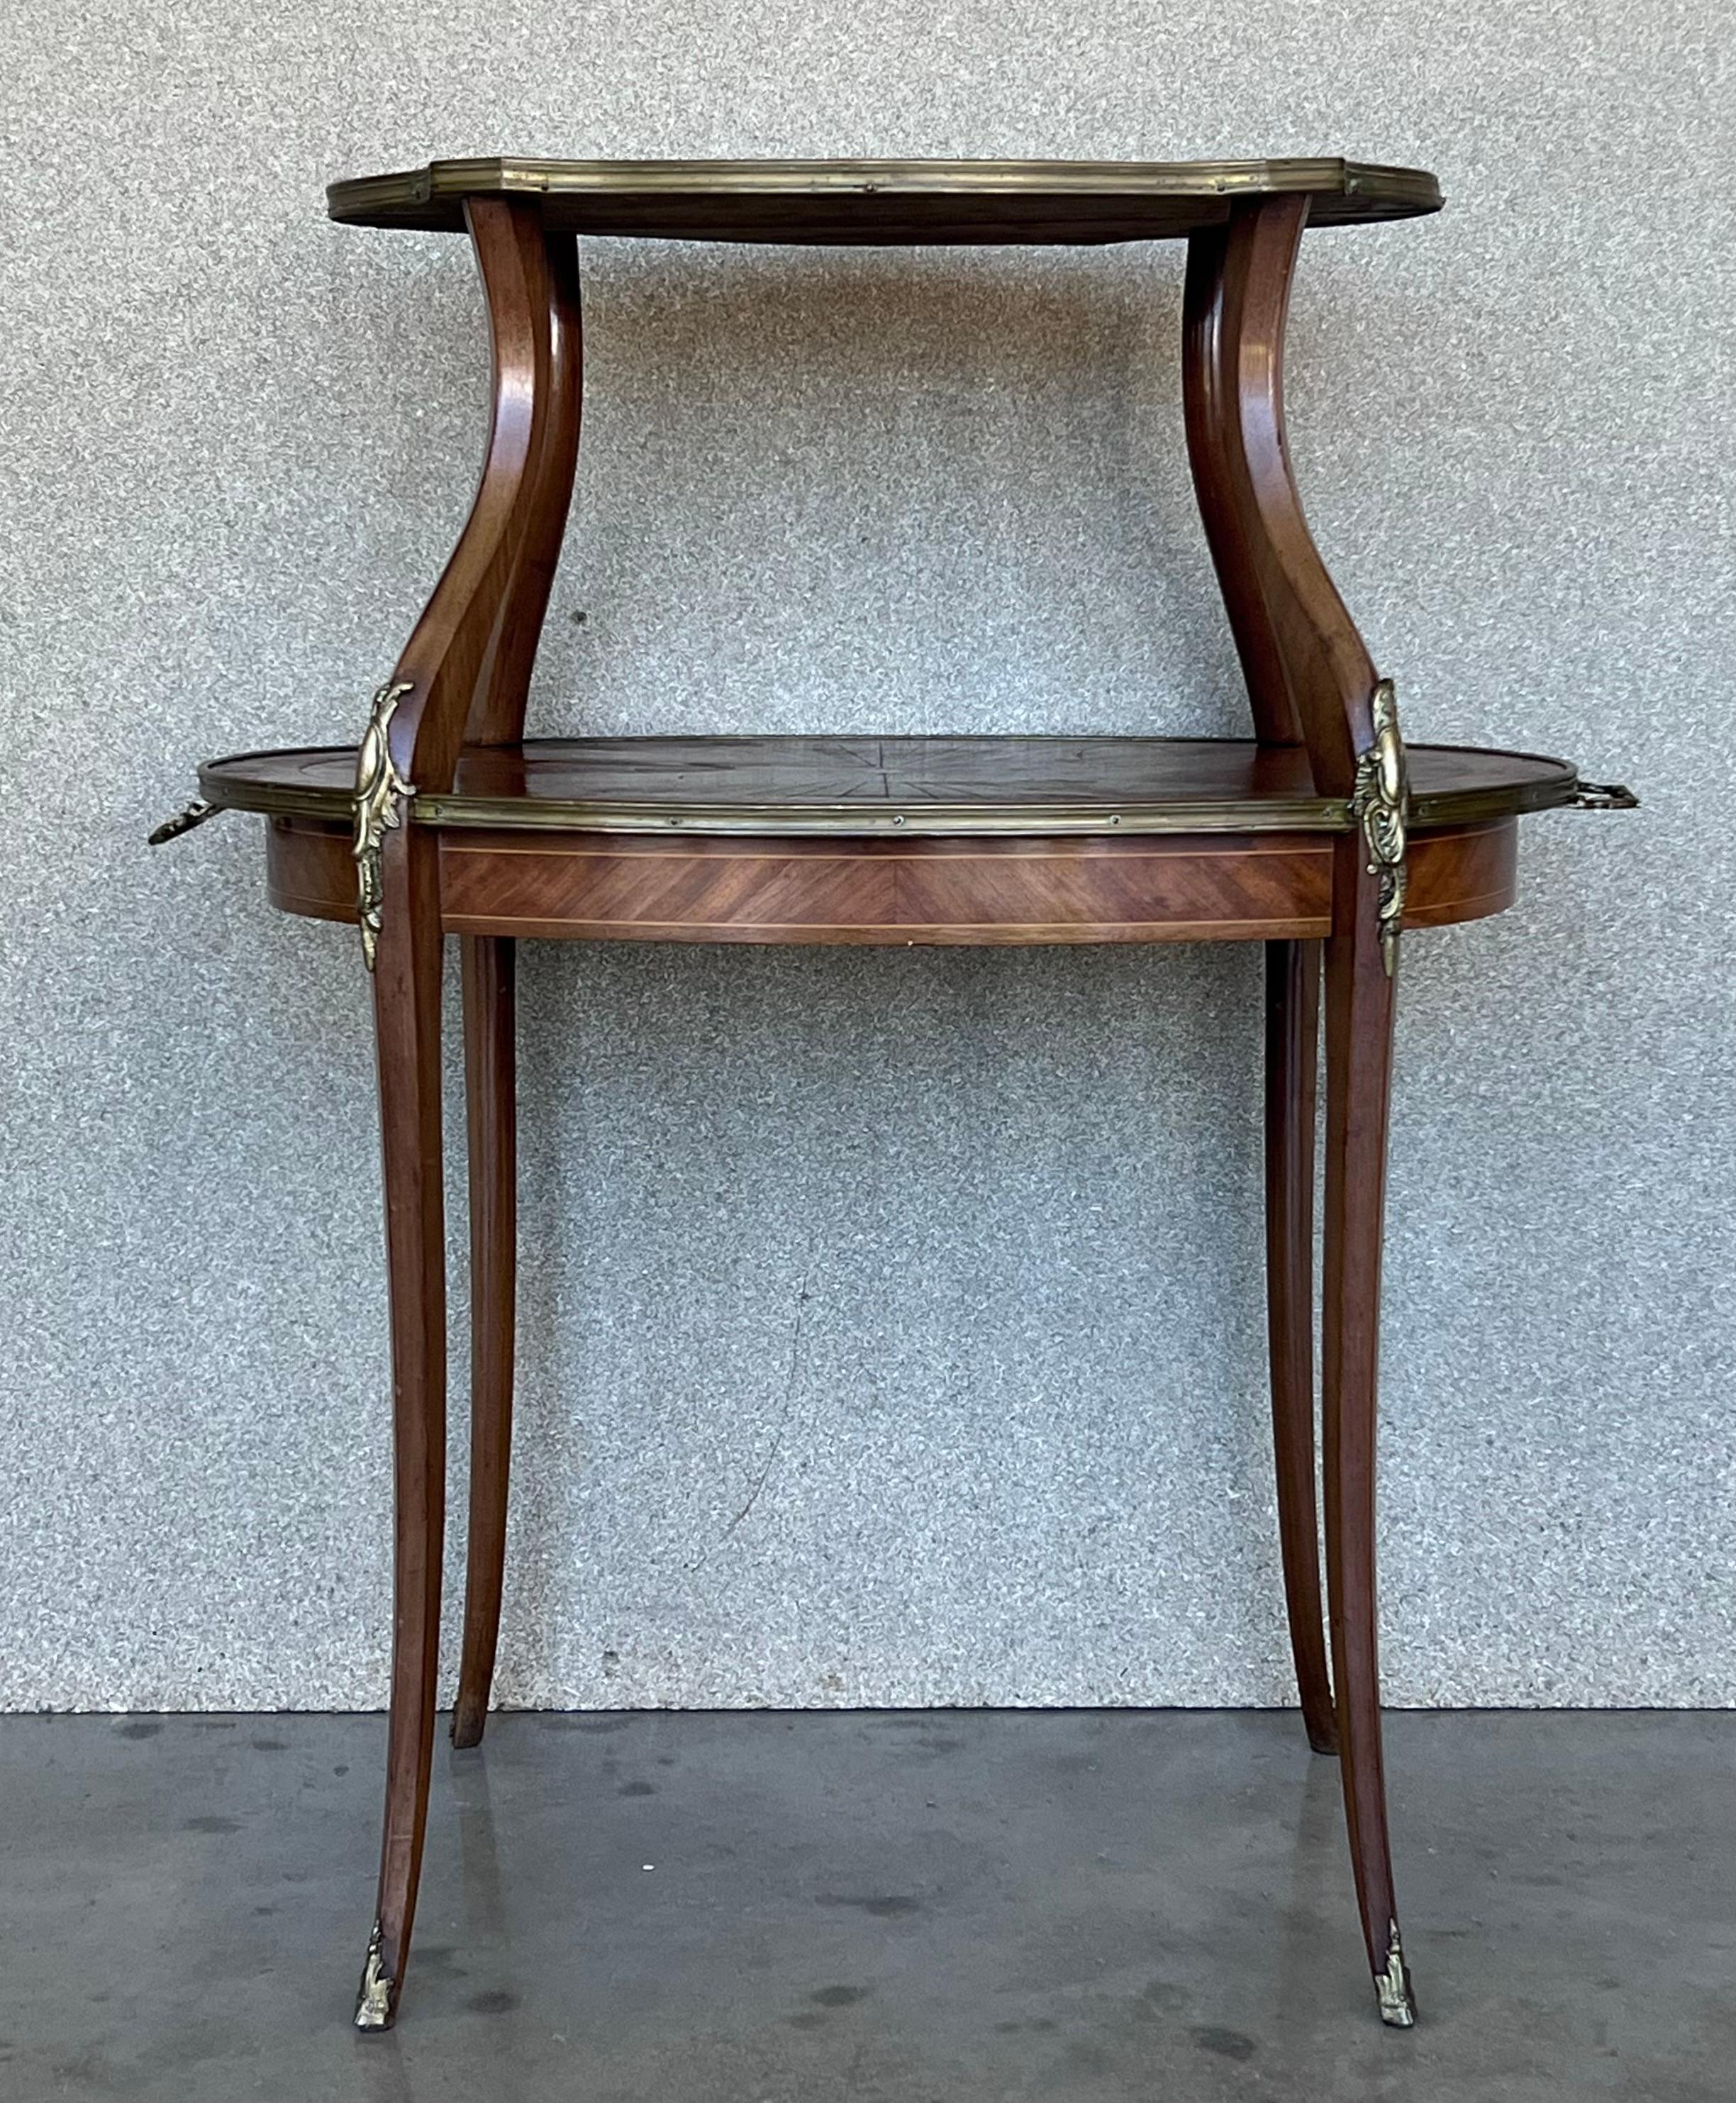 A charming French 19th century Louis XVI style side table in mahogany. The table is raised on cabriole legs. The table has two tiers decorated with pierced brass galleries. All below a bouillotte tole shade and two bronze handles in both